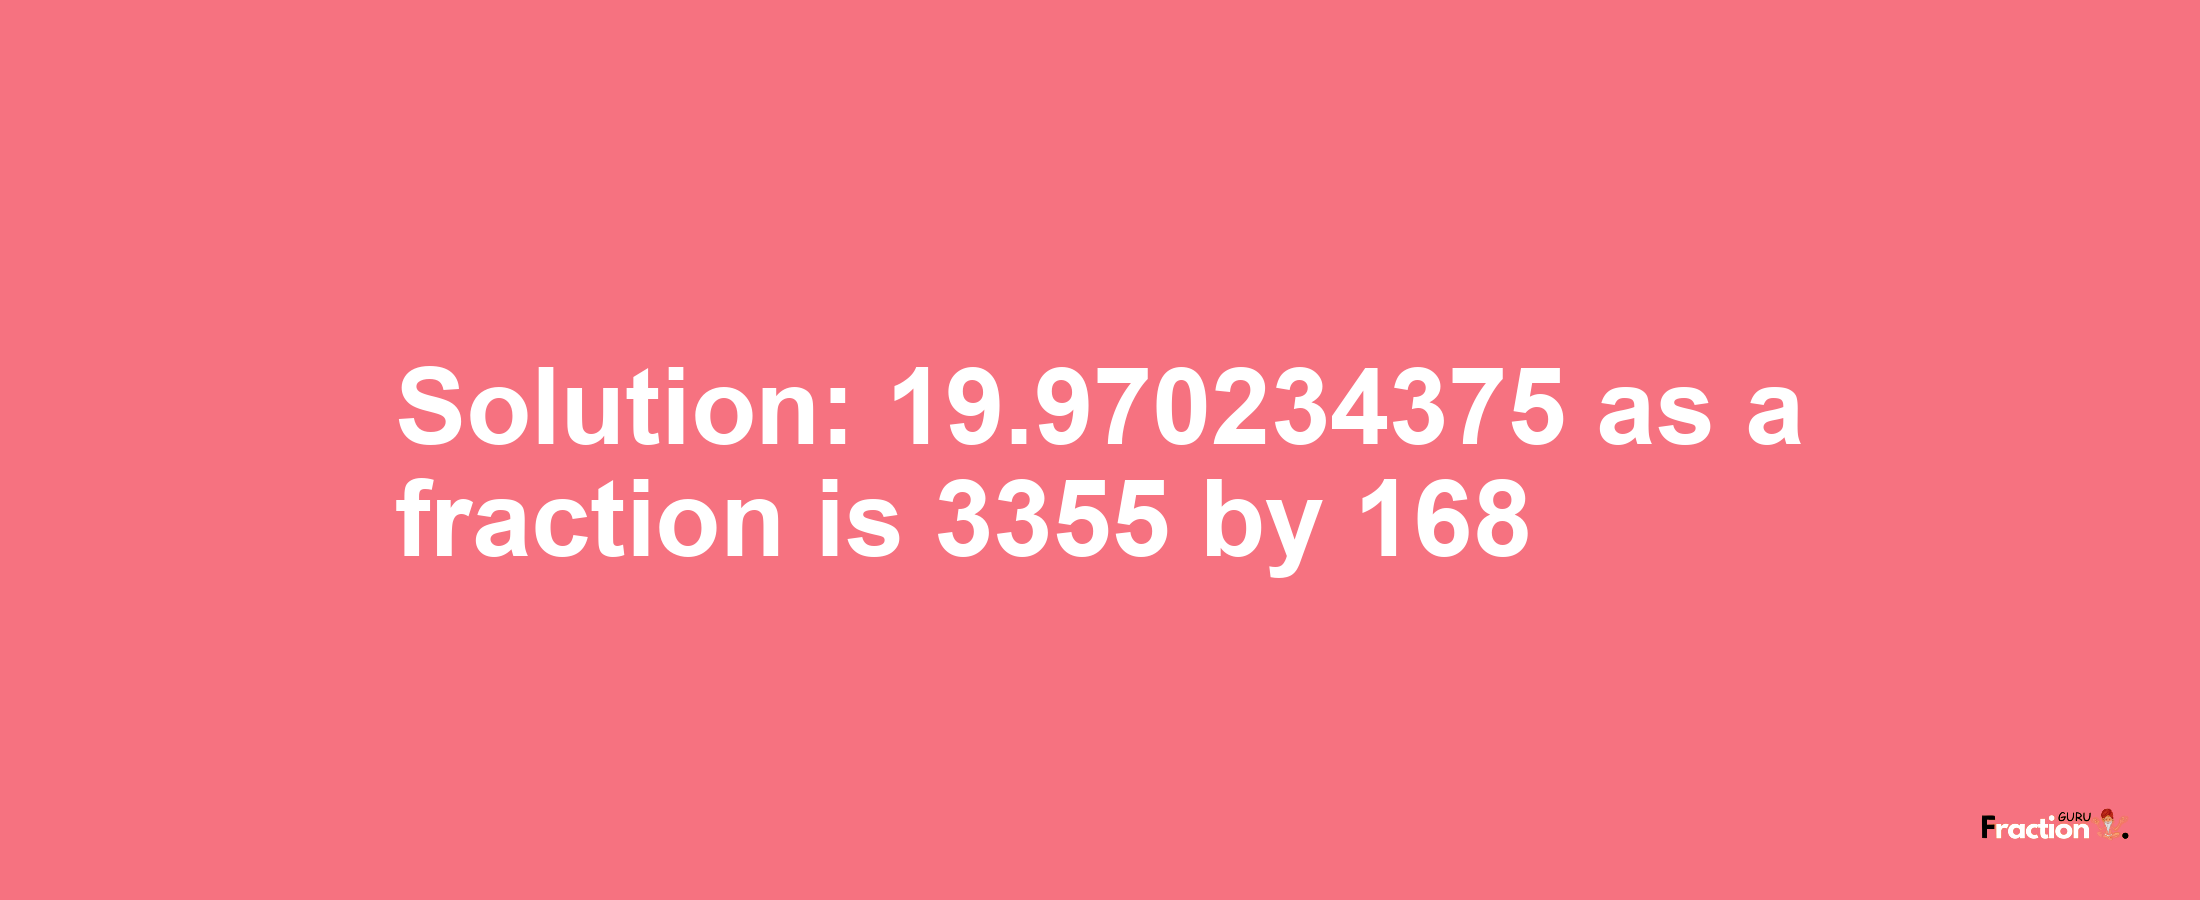 Solution:19.970234375 as a fraction is 3355/168